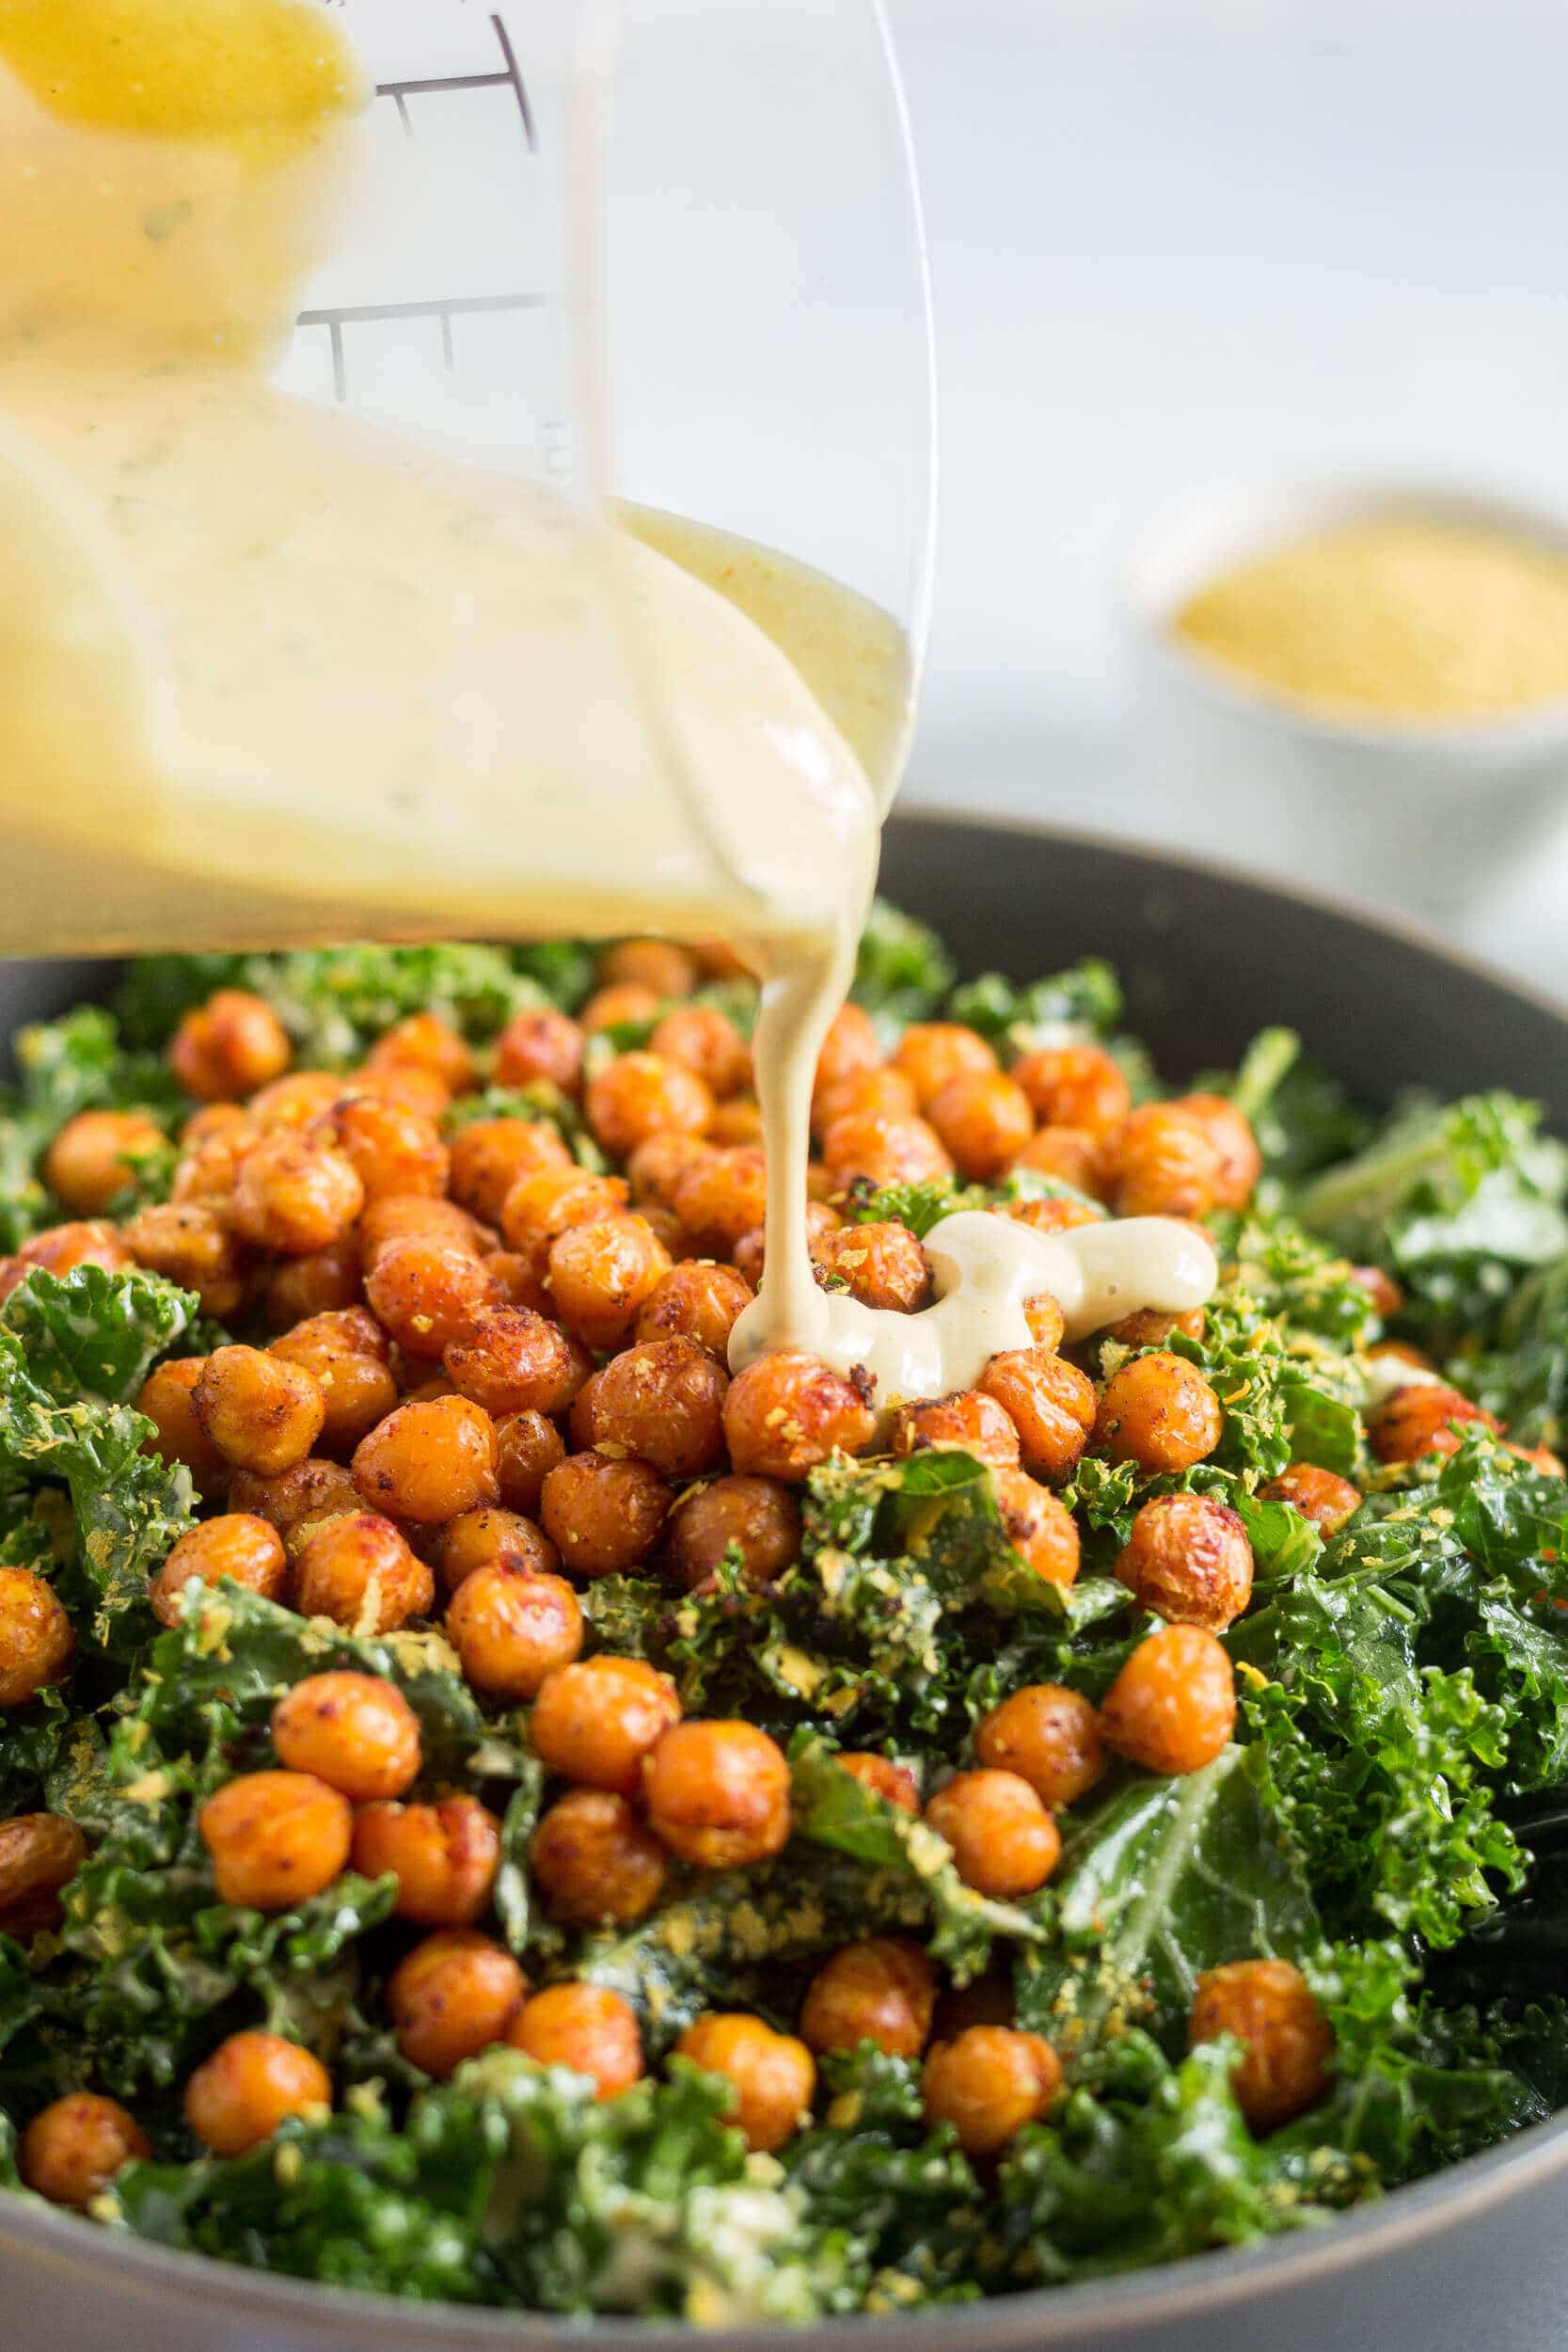 kale salt with roasted chickpeas in a grey bowl with vegan caesar dressing being poured on top